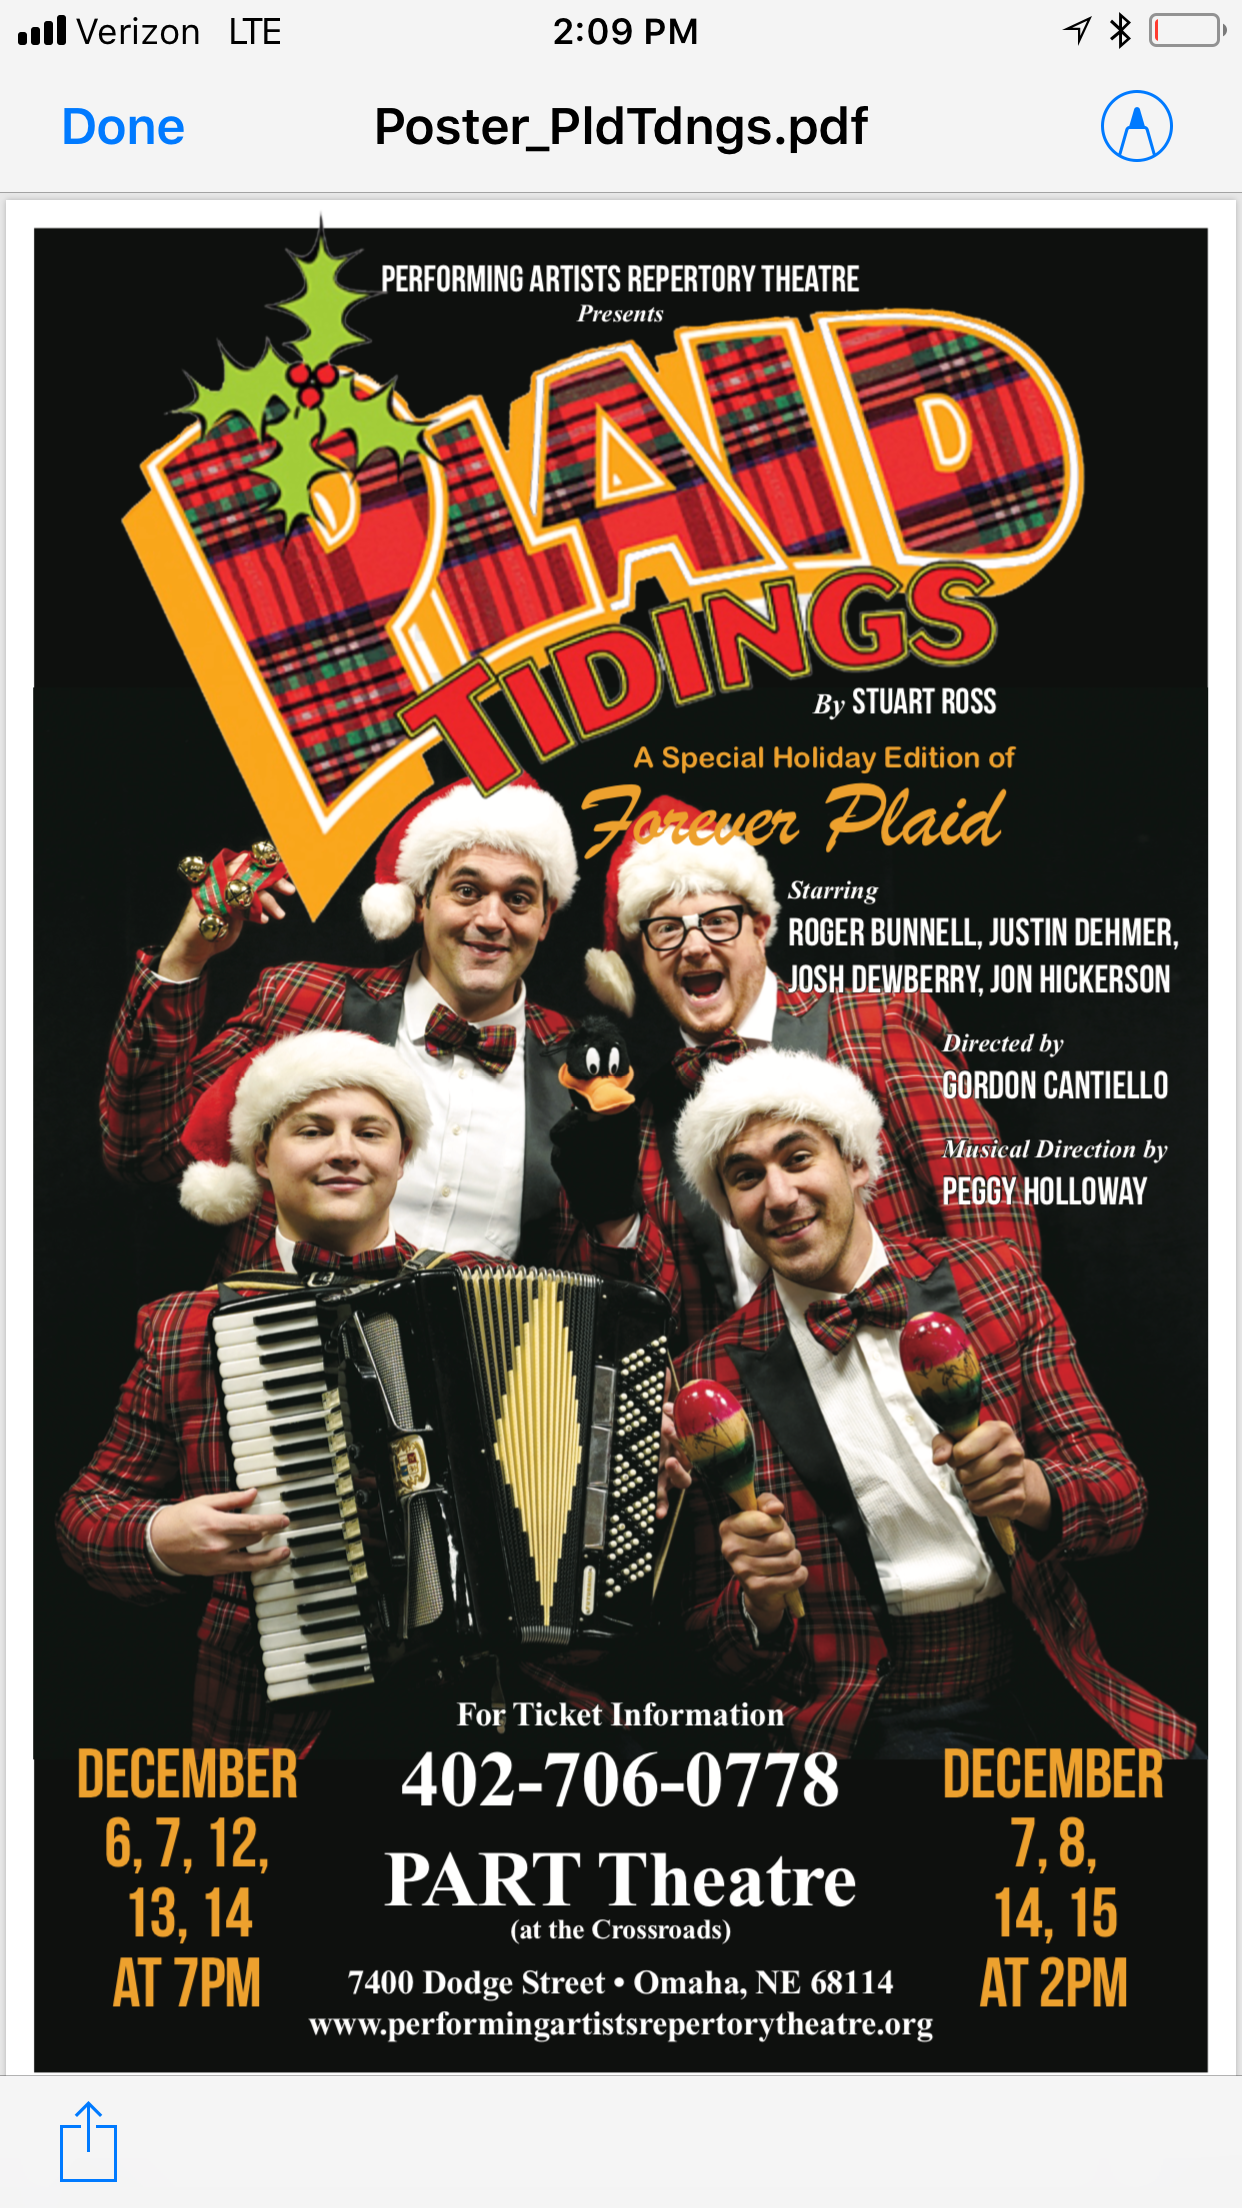  FOREVER PLAID TIDINGS by Stuart Ross featuring Roger Bunnell as Jinx, Justin Dehmer as Smudge, Josh Dewberry as Sparky, and Jon Hickerson as Frankie has written an extraordinary 2-hour energetic extravaganza featuring 30 songs made up of not only traditional holiday favorites such as 